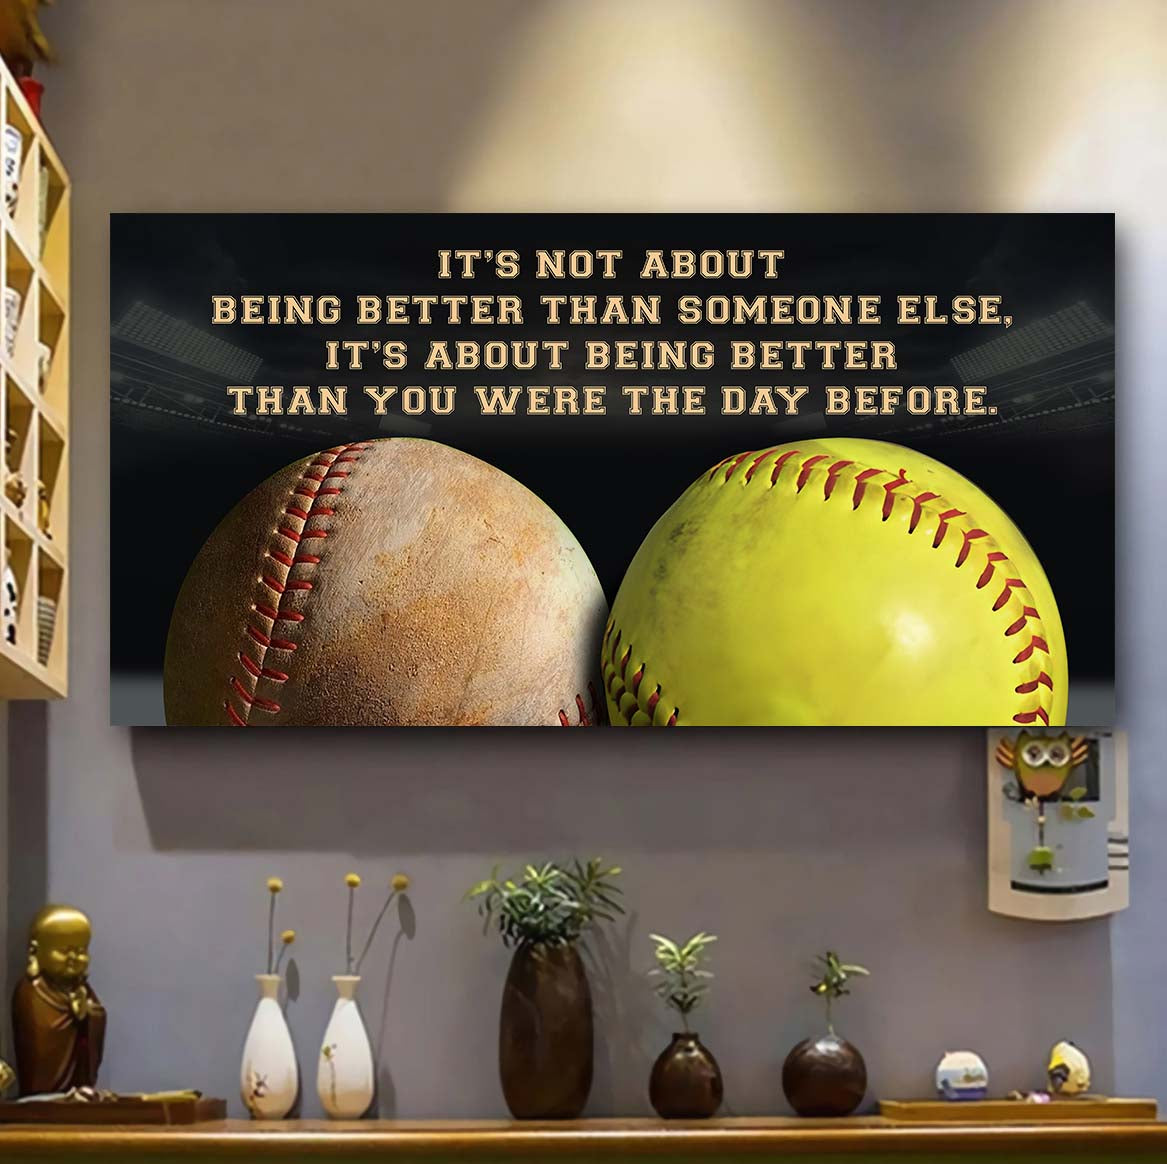 Baseball softball It is not About Being Better Than Someone Else It is about being better than you were the day before